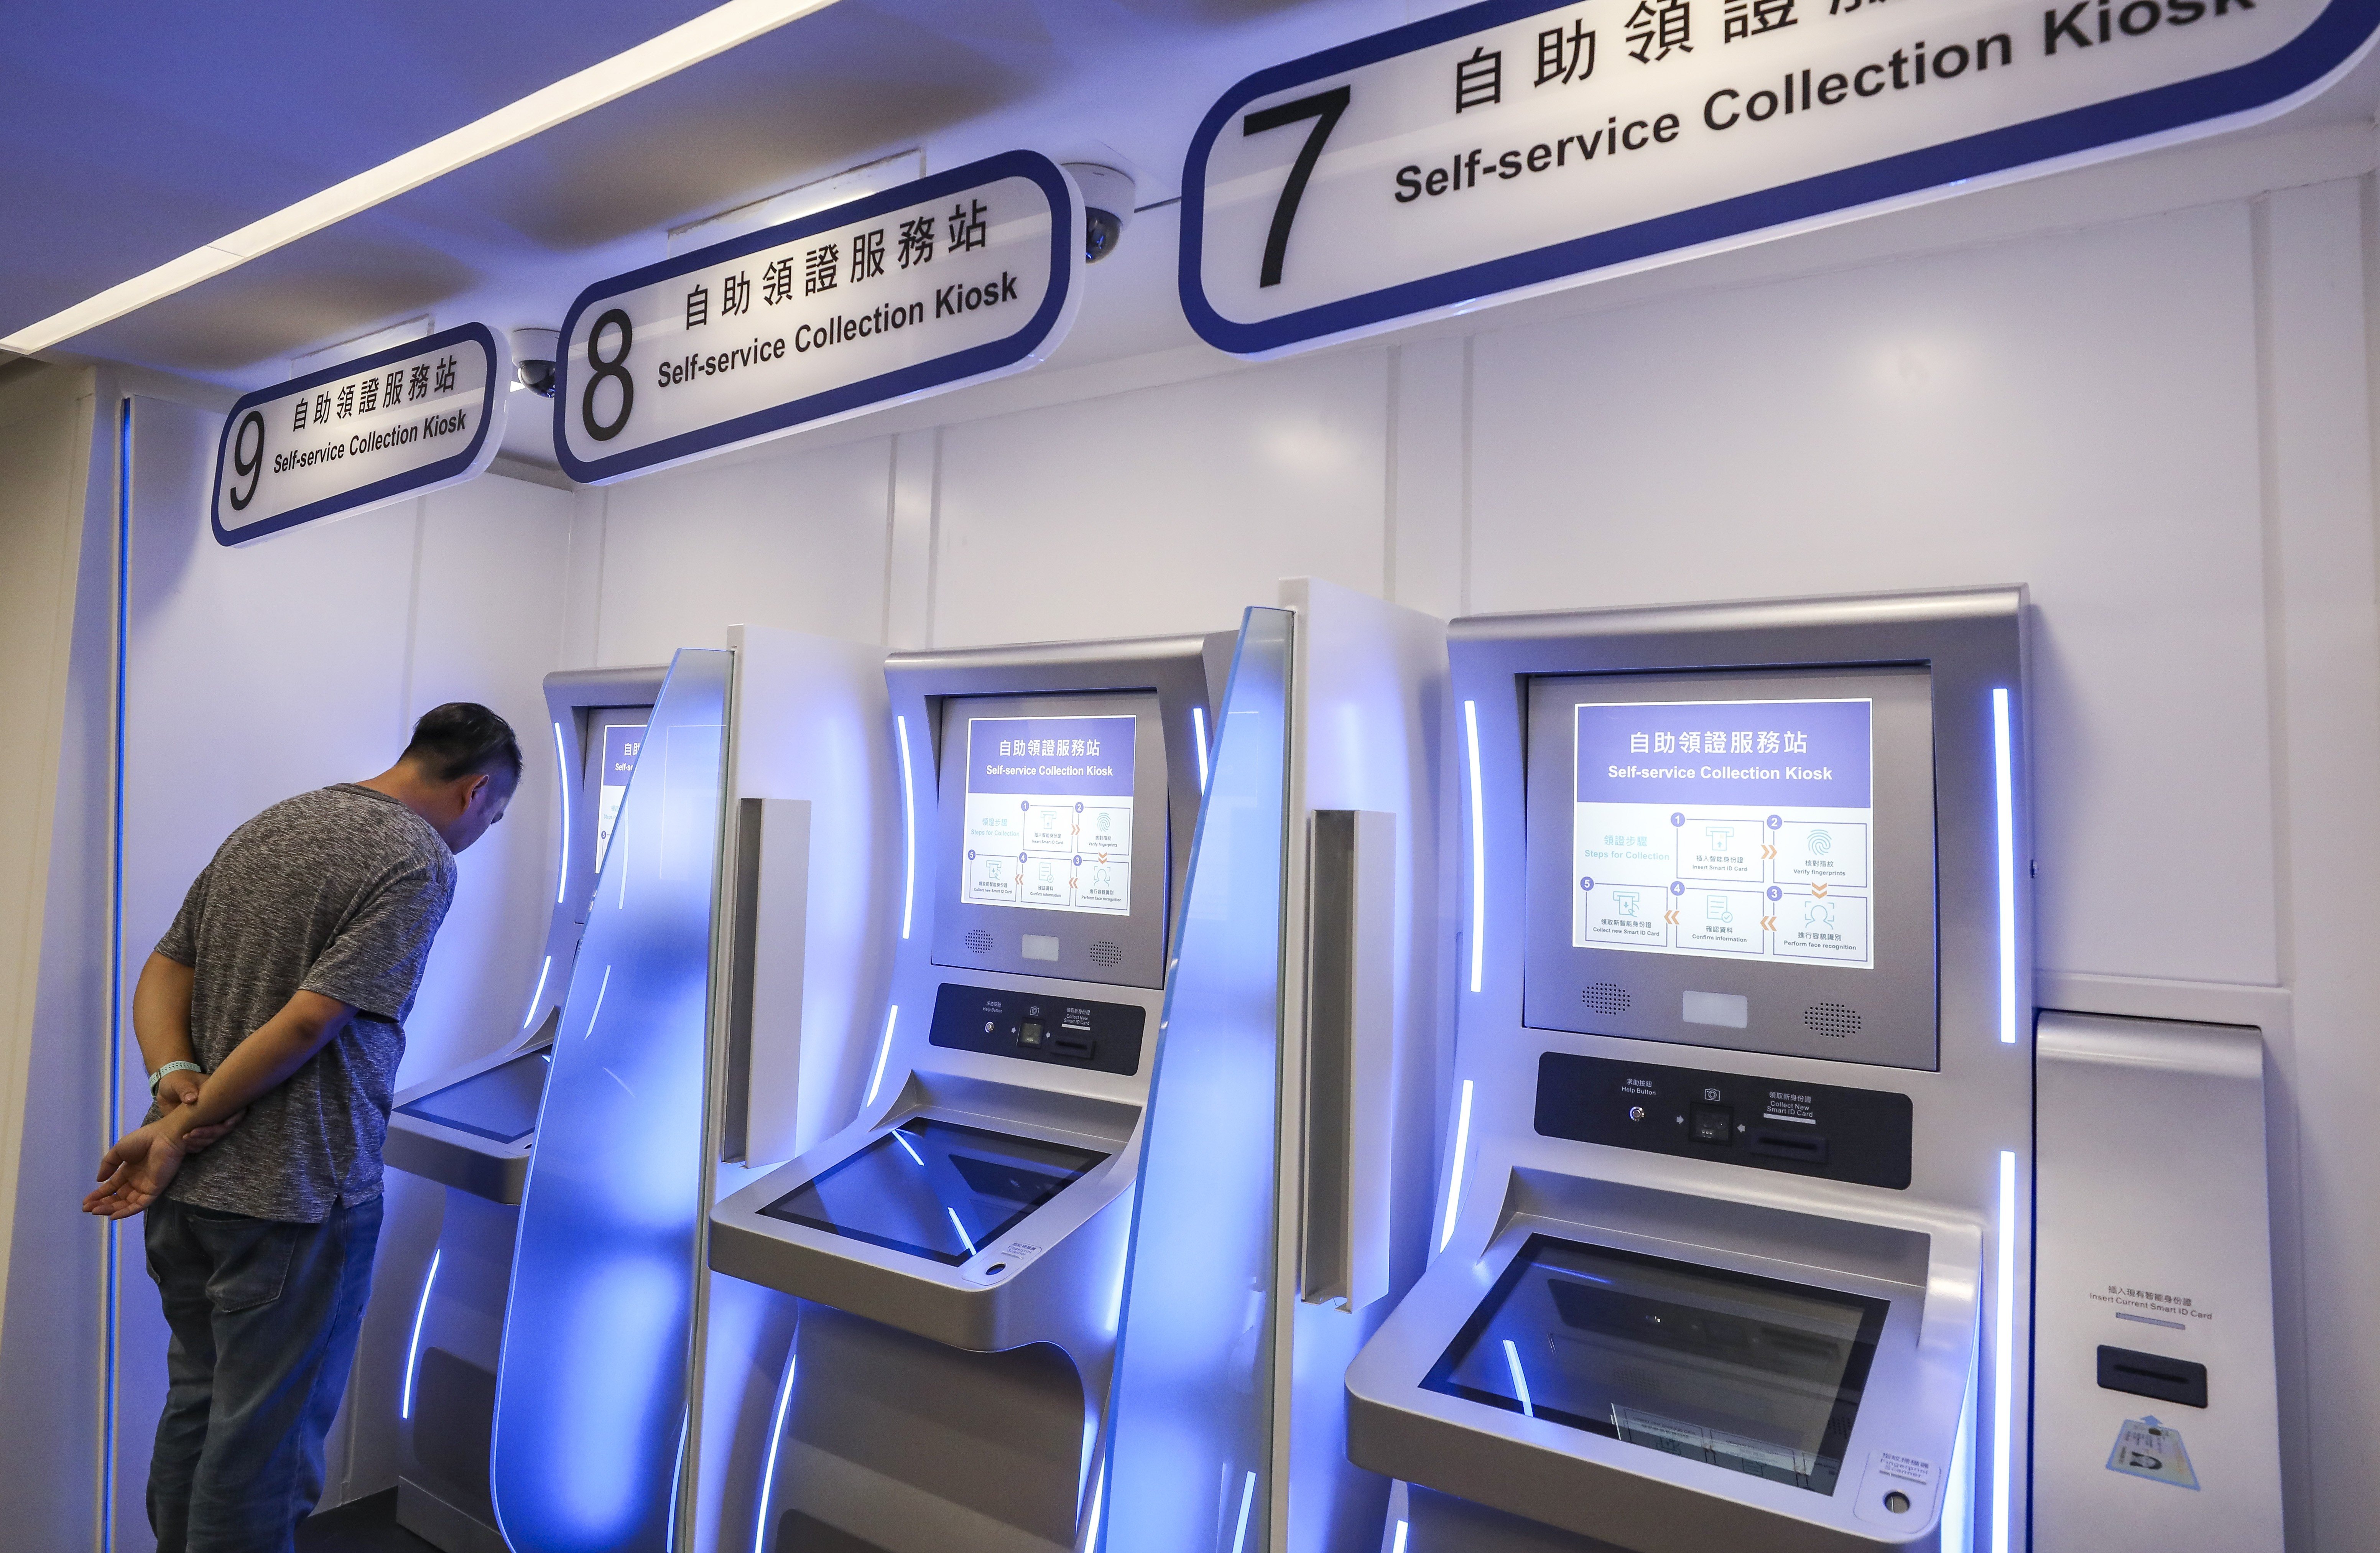 Self-service kiosks at a card replacement centre in Wan Chai. Photo: Dickson Lee